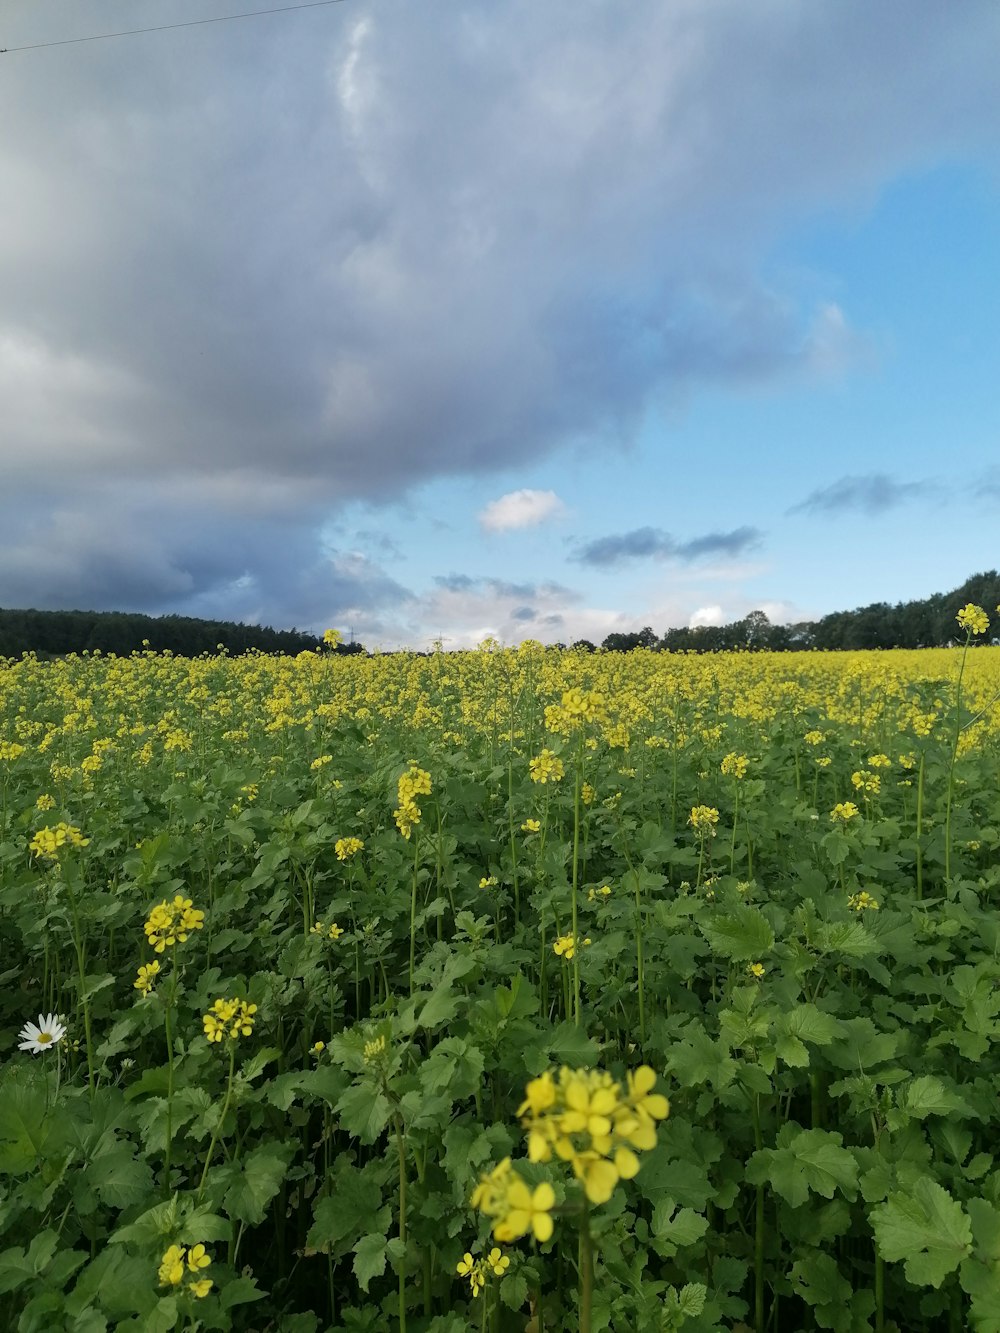 a field full of yellow flowers under a cloudy sky